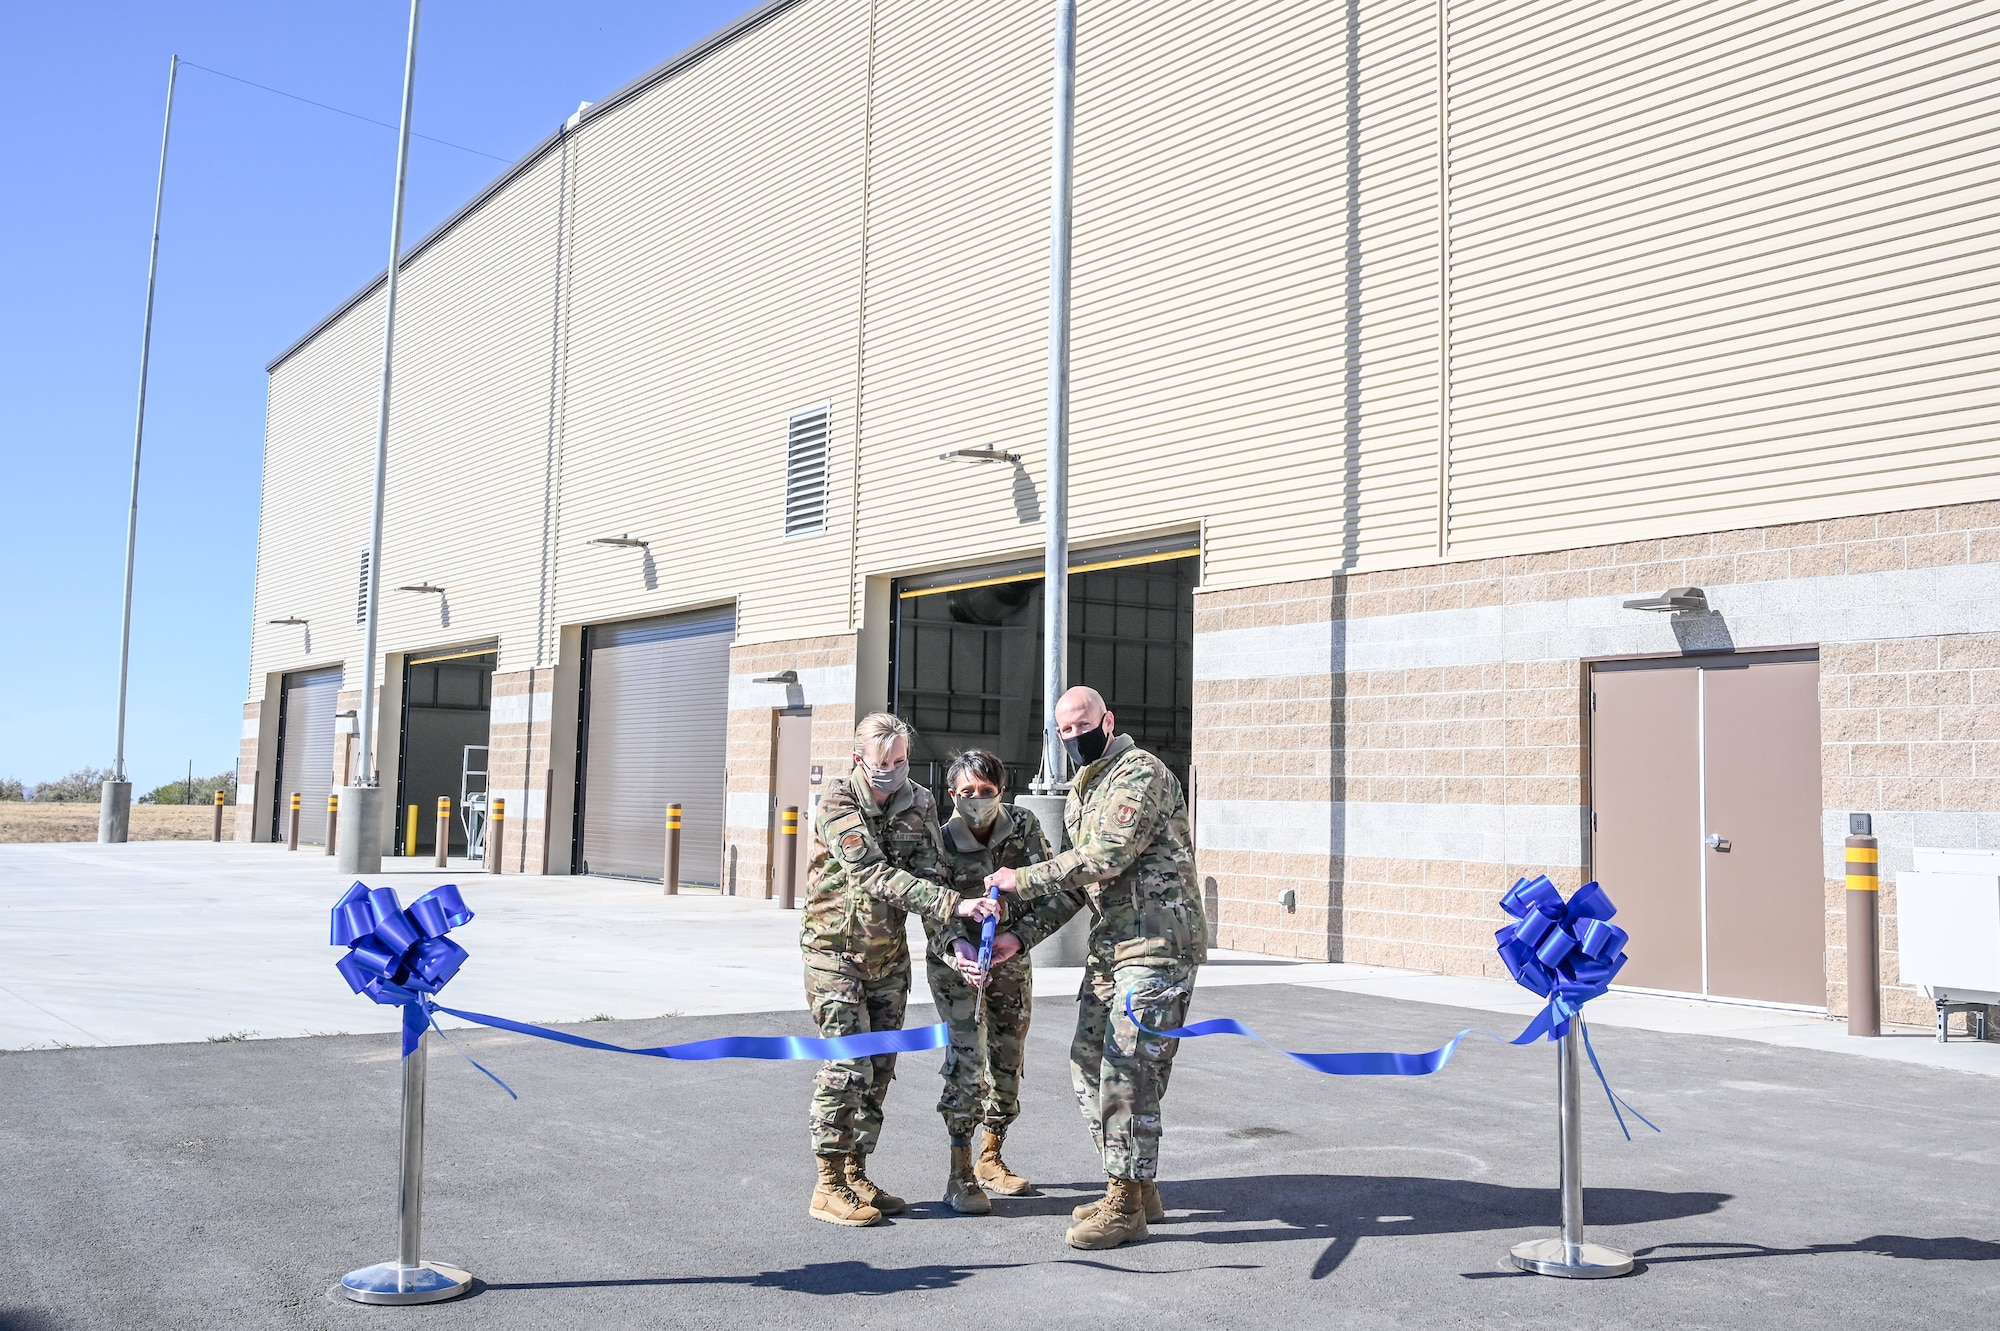 Lt. Col. Naomi Franchetti, 649th Munitions Squadron commander, Col. Jenise Carroll, 75th Air Base Wing commander and Chief Master Sgt. Christopher Walker, 75th ABW command chief, cut the ribbon on 649th MUNS new Standarized Air Munitions Package facility Oct. 22, 2020, at Hill Air Force Base, Utah. (U.S. Air Force photo by Cynthia Griggs)